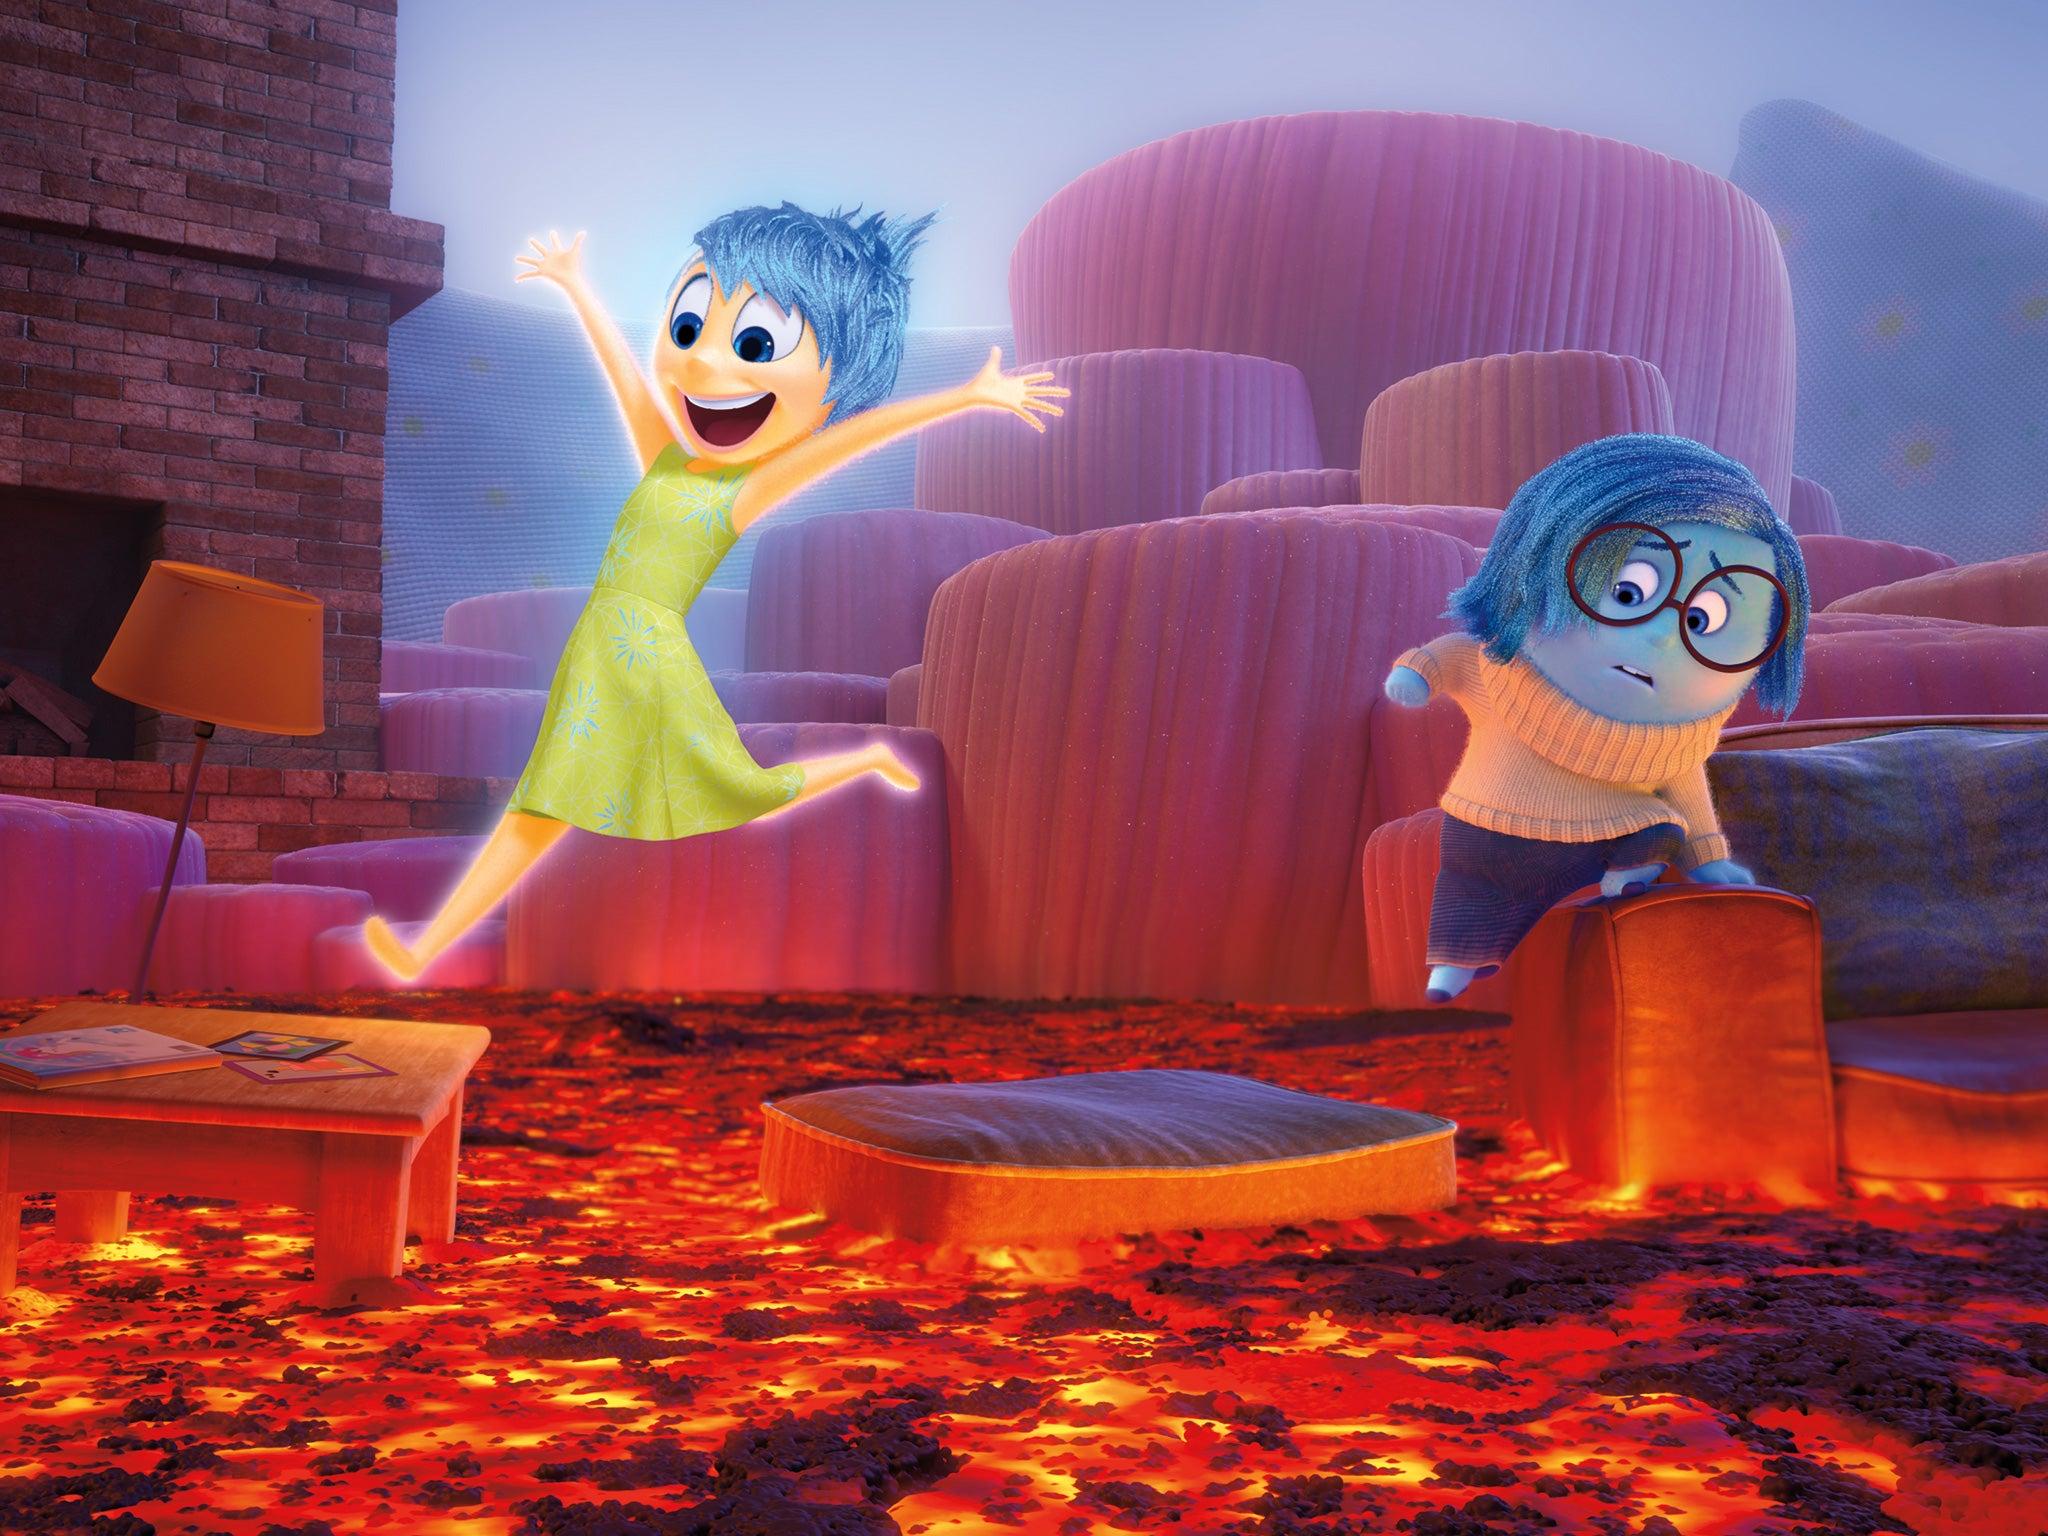 Onward': Disney Pixar announces cast and release date for new